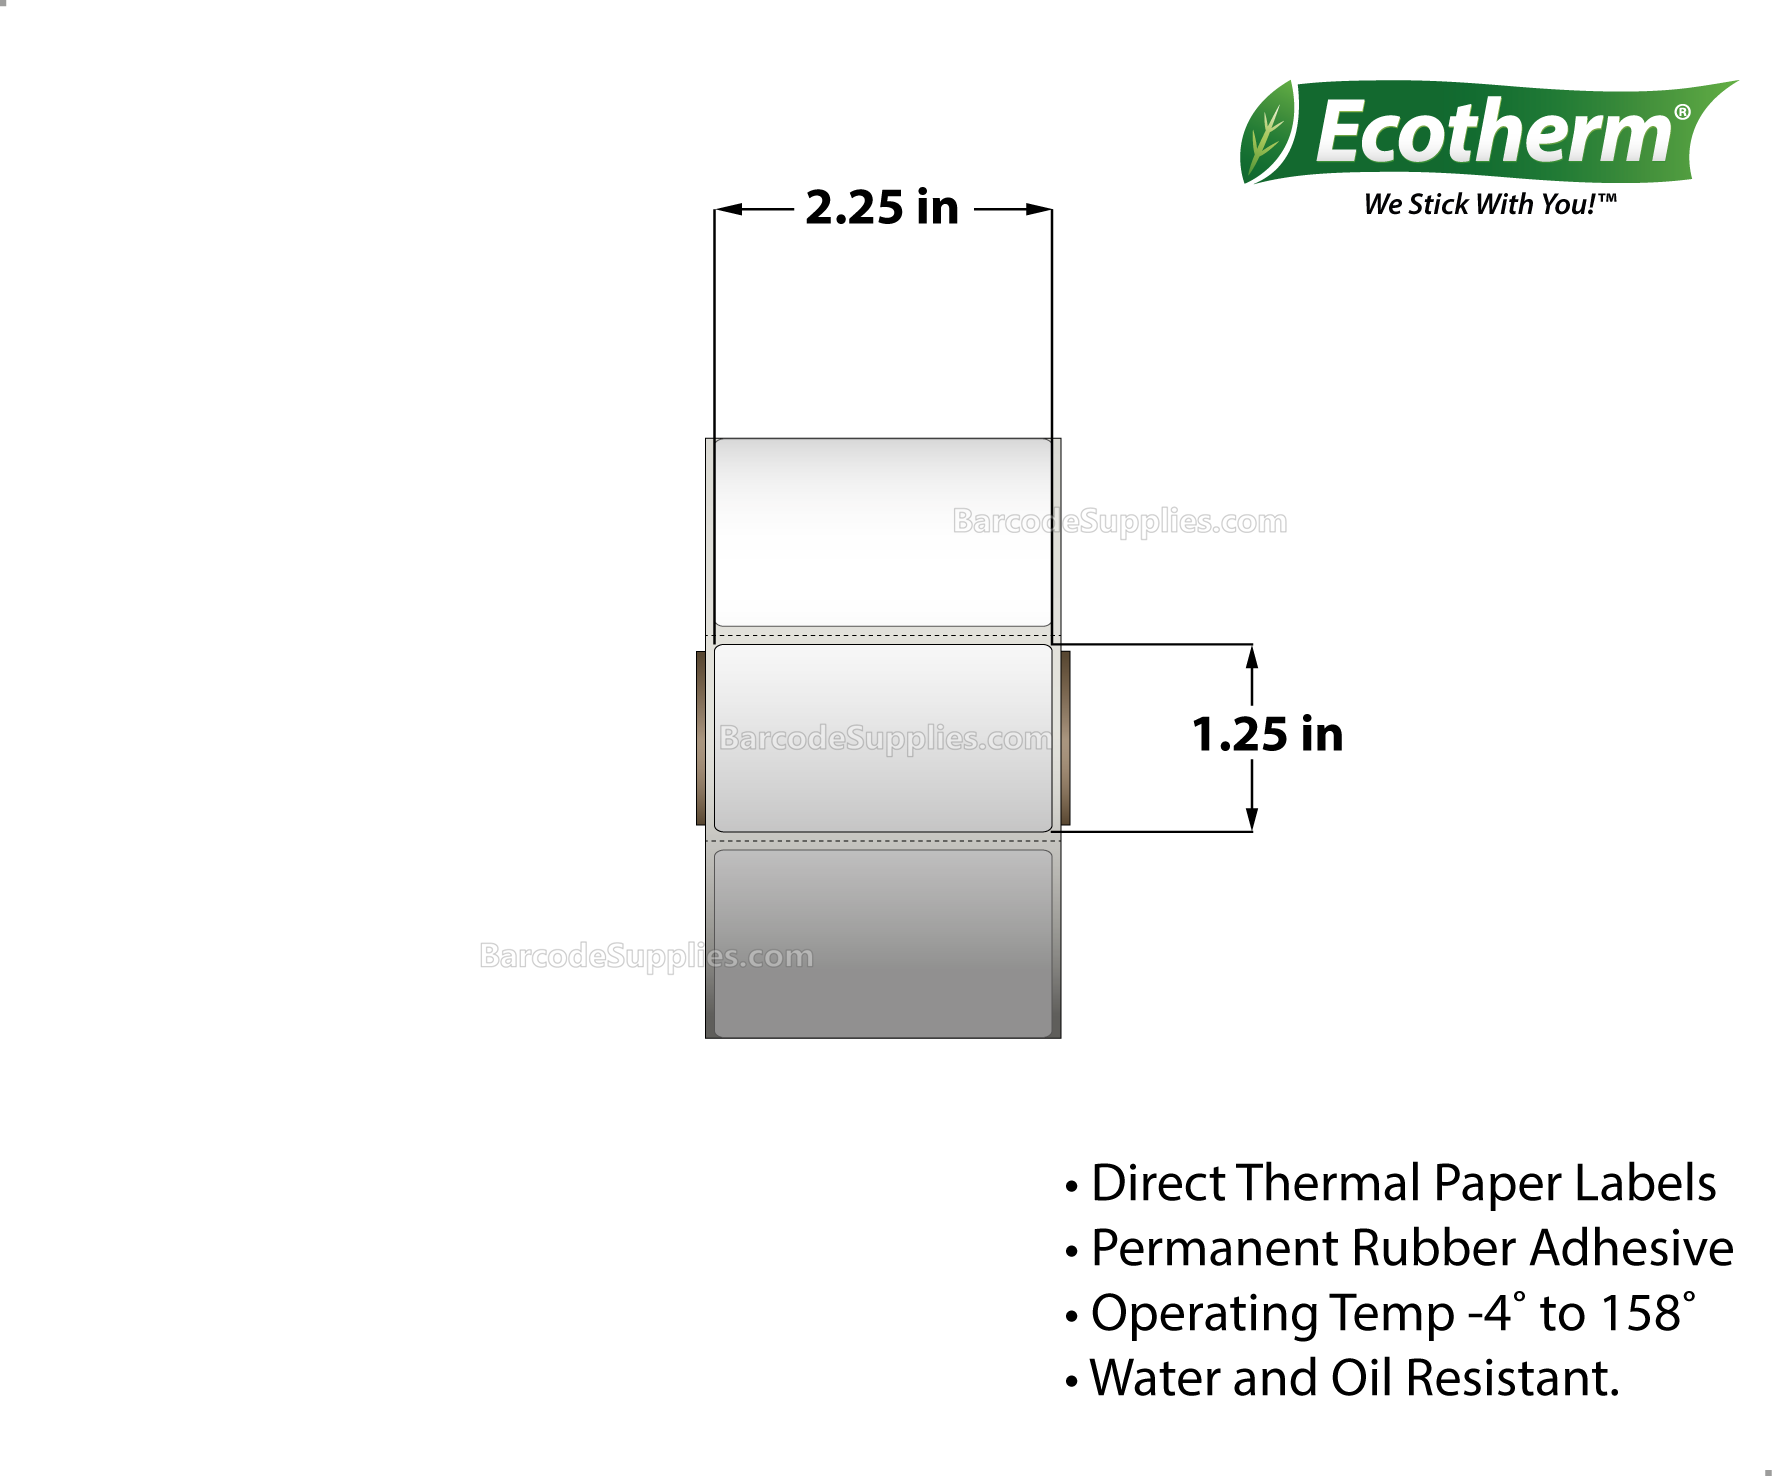 2.25 x 1.25 Direct Thermal White Labels With Rubber Adhesive - Perforated - 1135 Labels Per Roll - Carton Of 4 Rolls - 4540 Labels Total - MPN: ECOTHERM14103-4